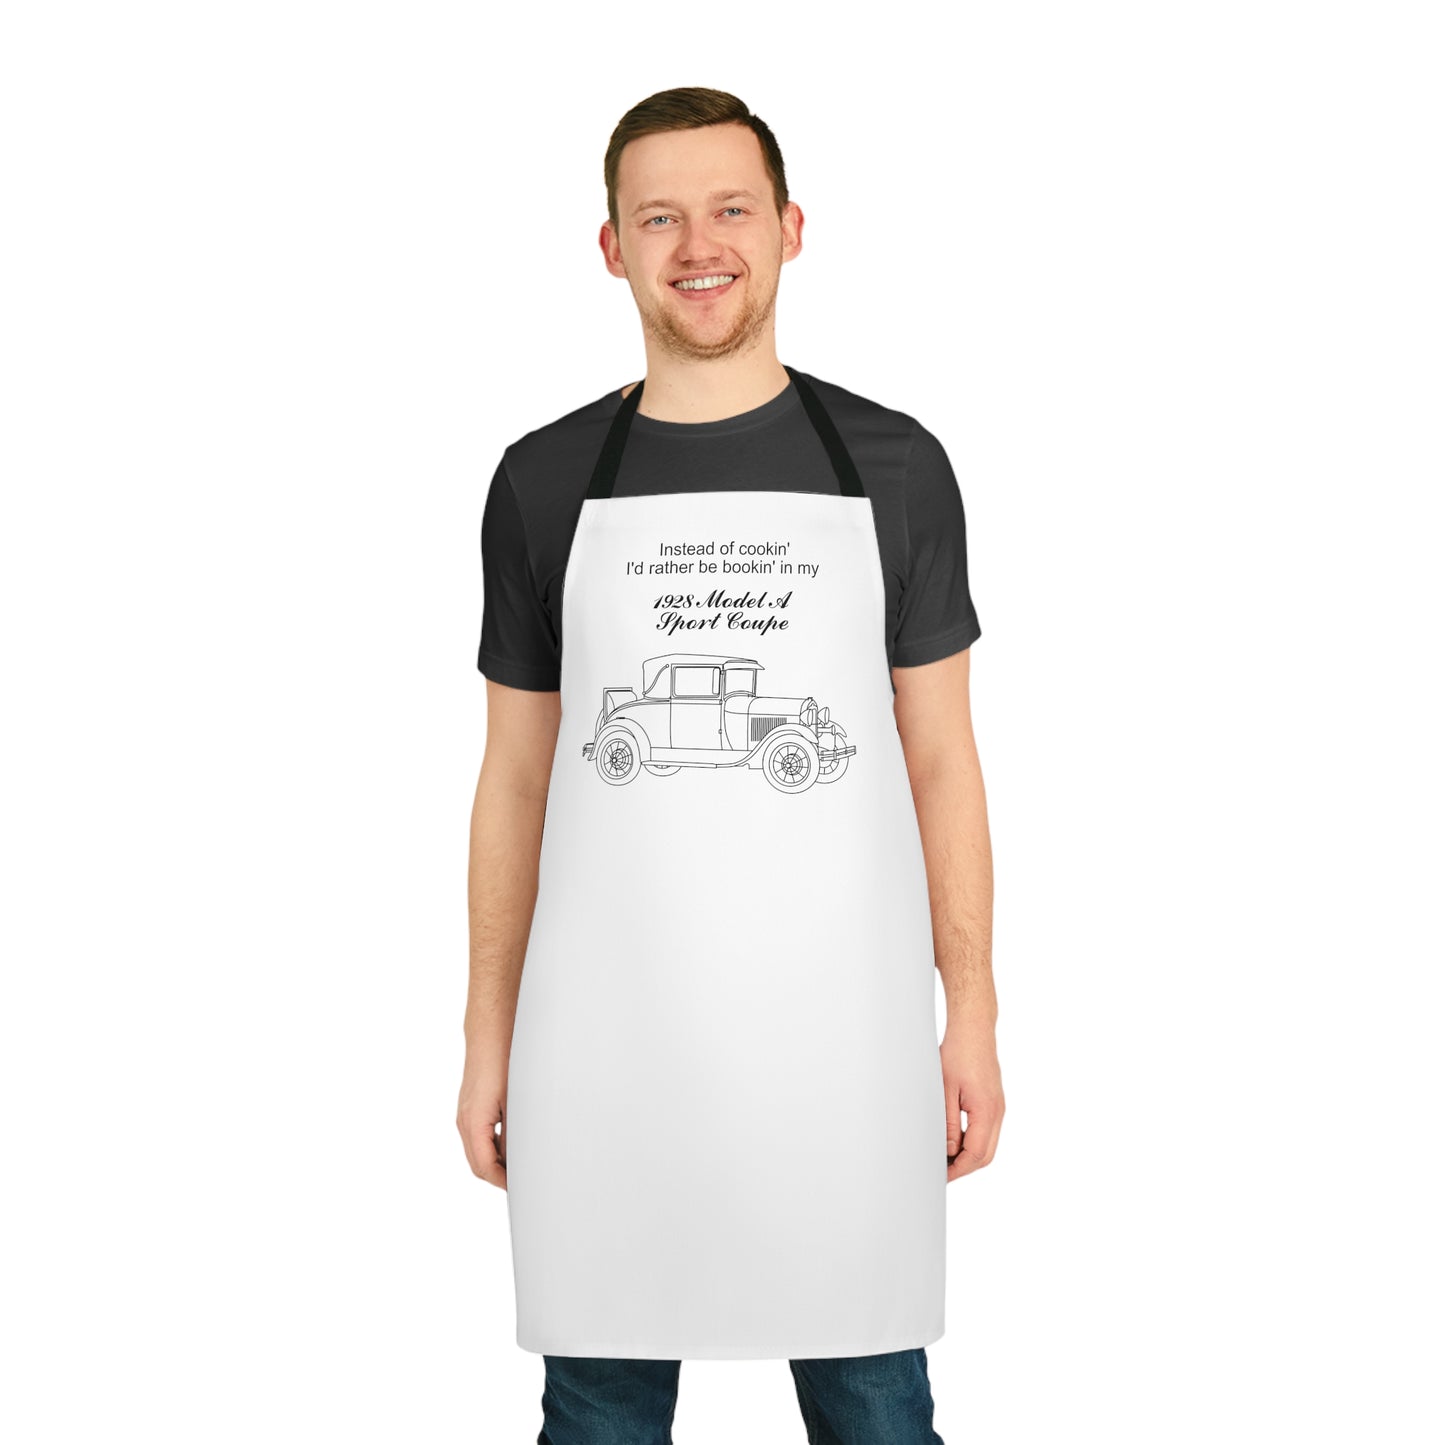 1928 Sport Coupe Cookin' Apron